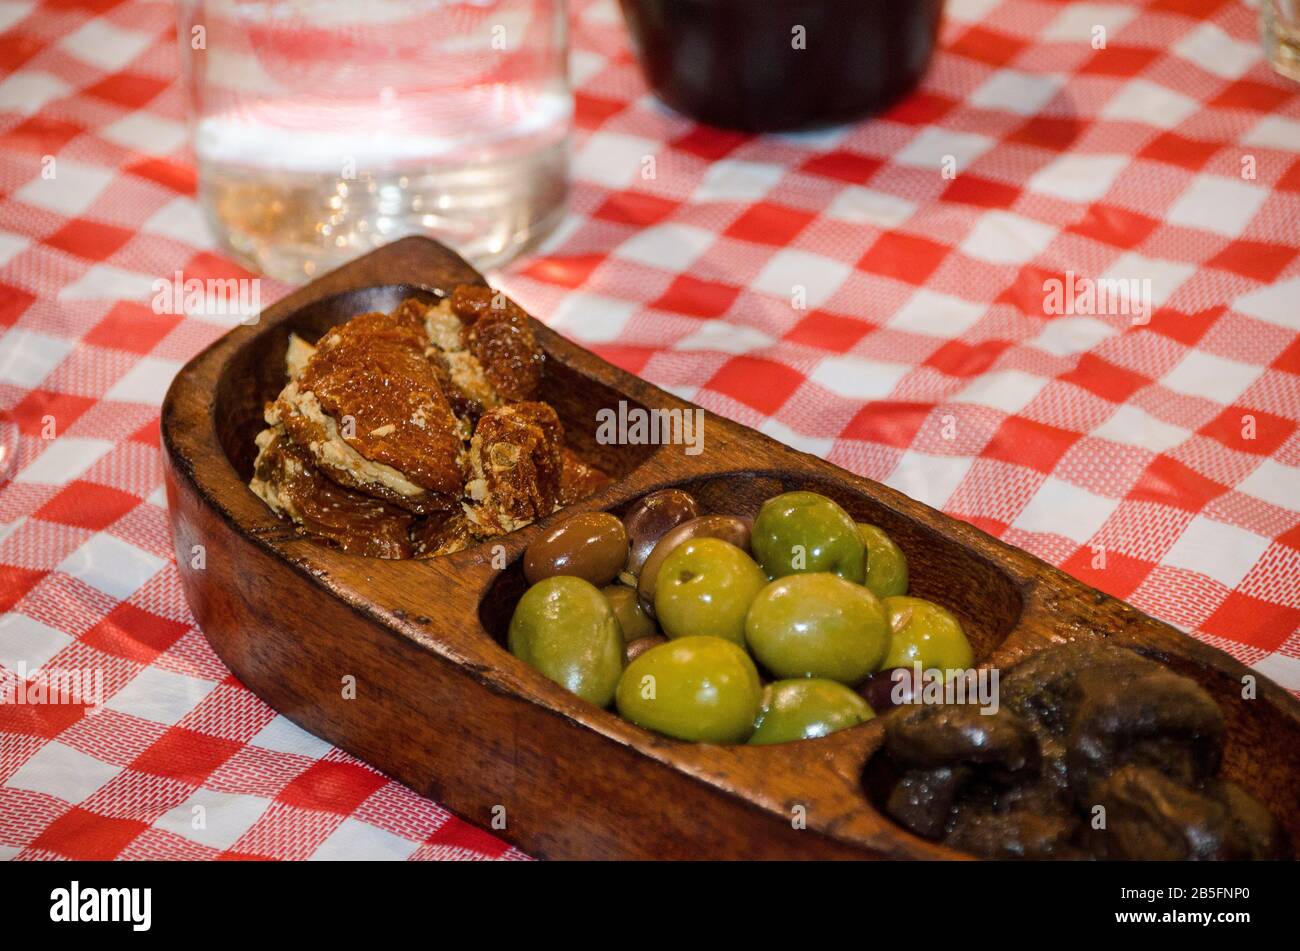 Bowls of Green and black olives served as appetizers Stock Photo